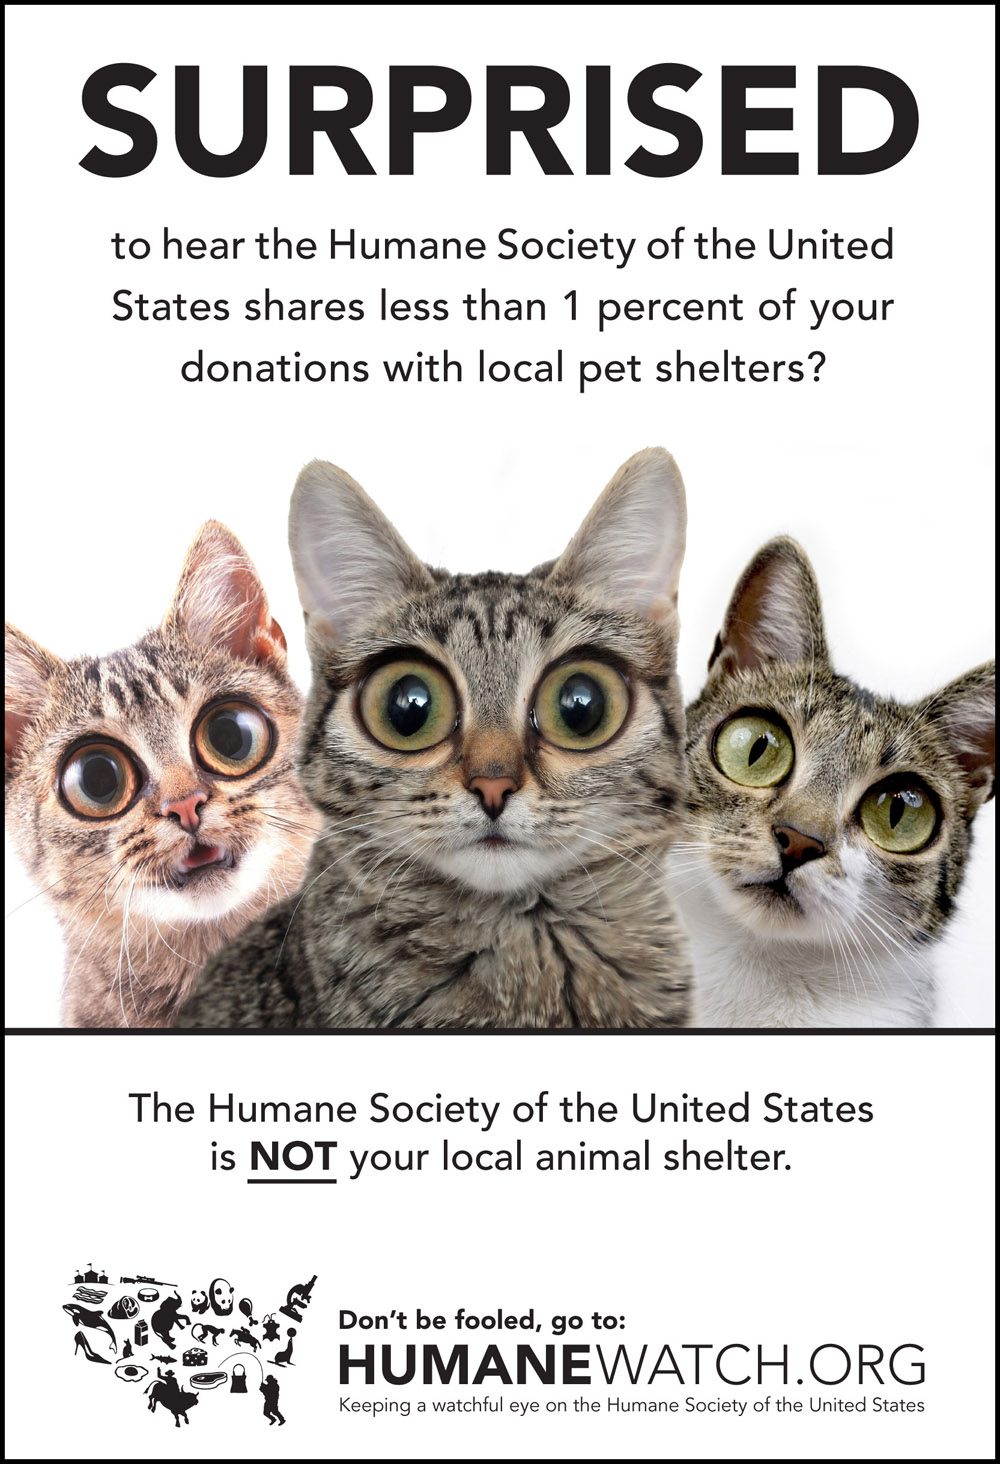 “Surprised?” ad with cats - HumaneWatch